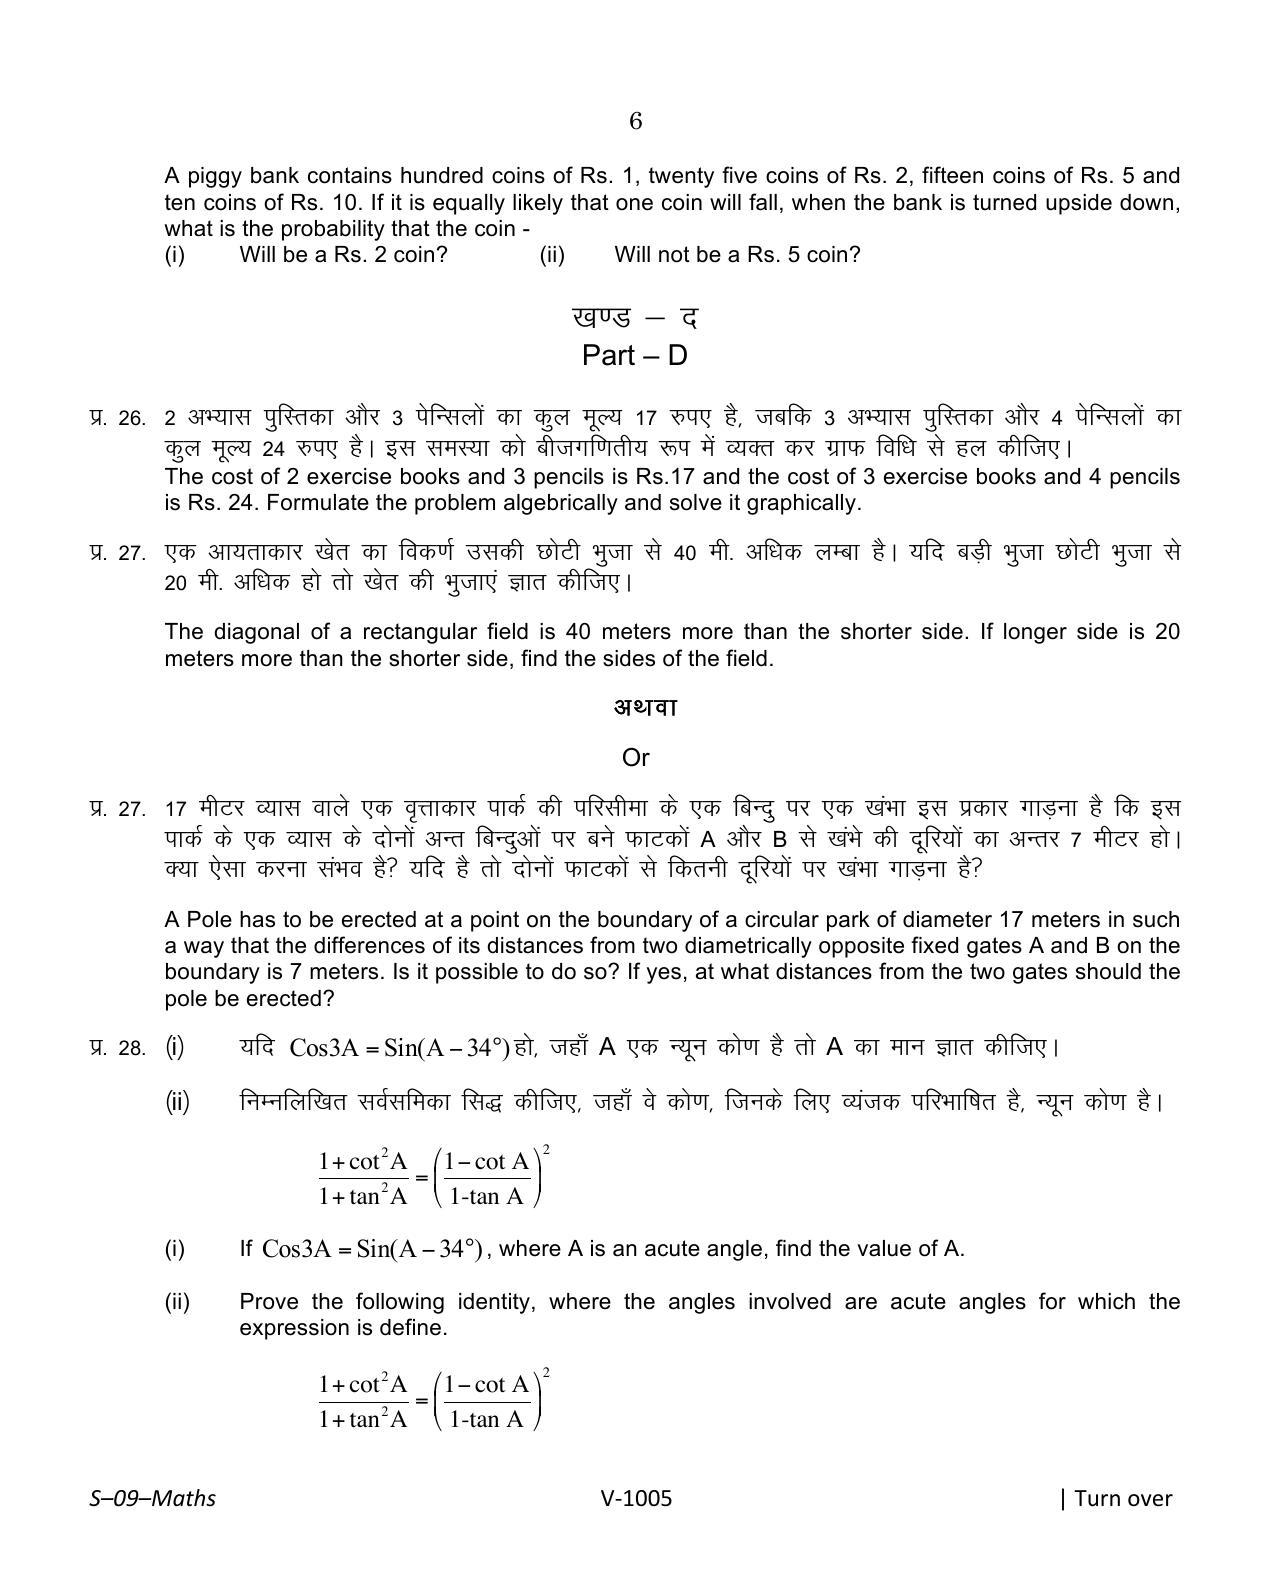 RBSE Class 10 Mathematics 2016 Question Paper - Page 6